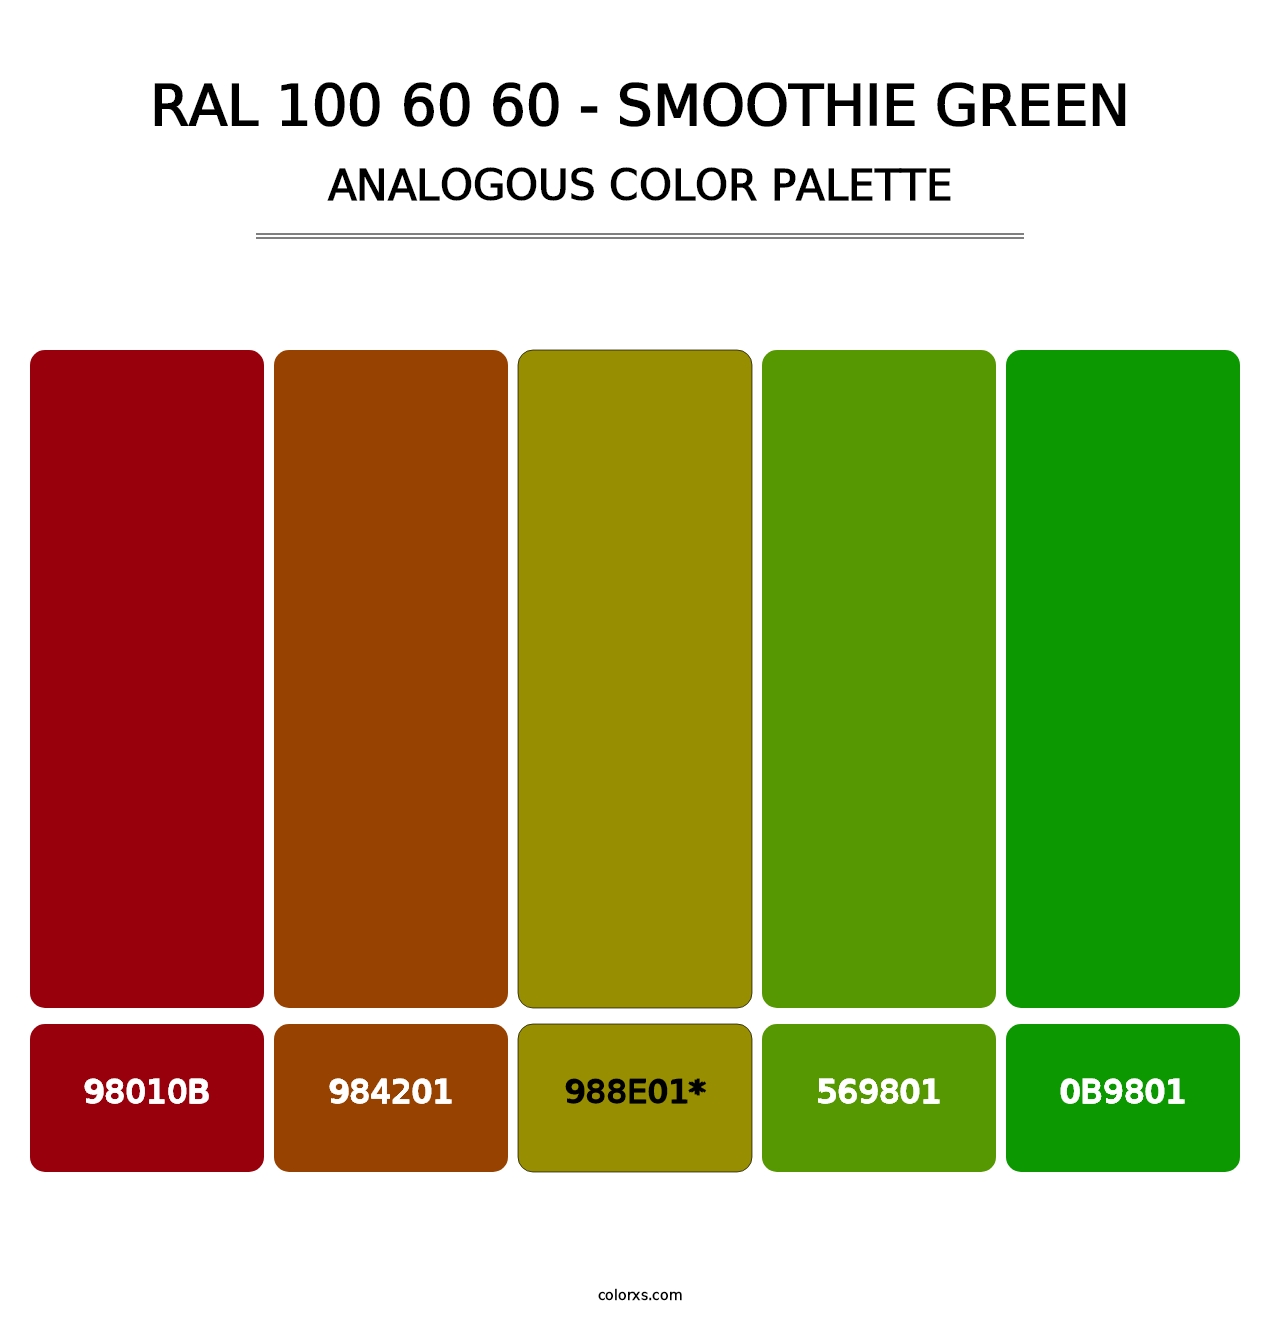 RAL 100 60 60 - Smoothie Green - Analogous Color Palette